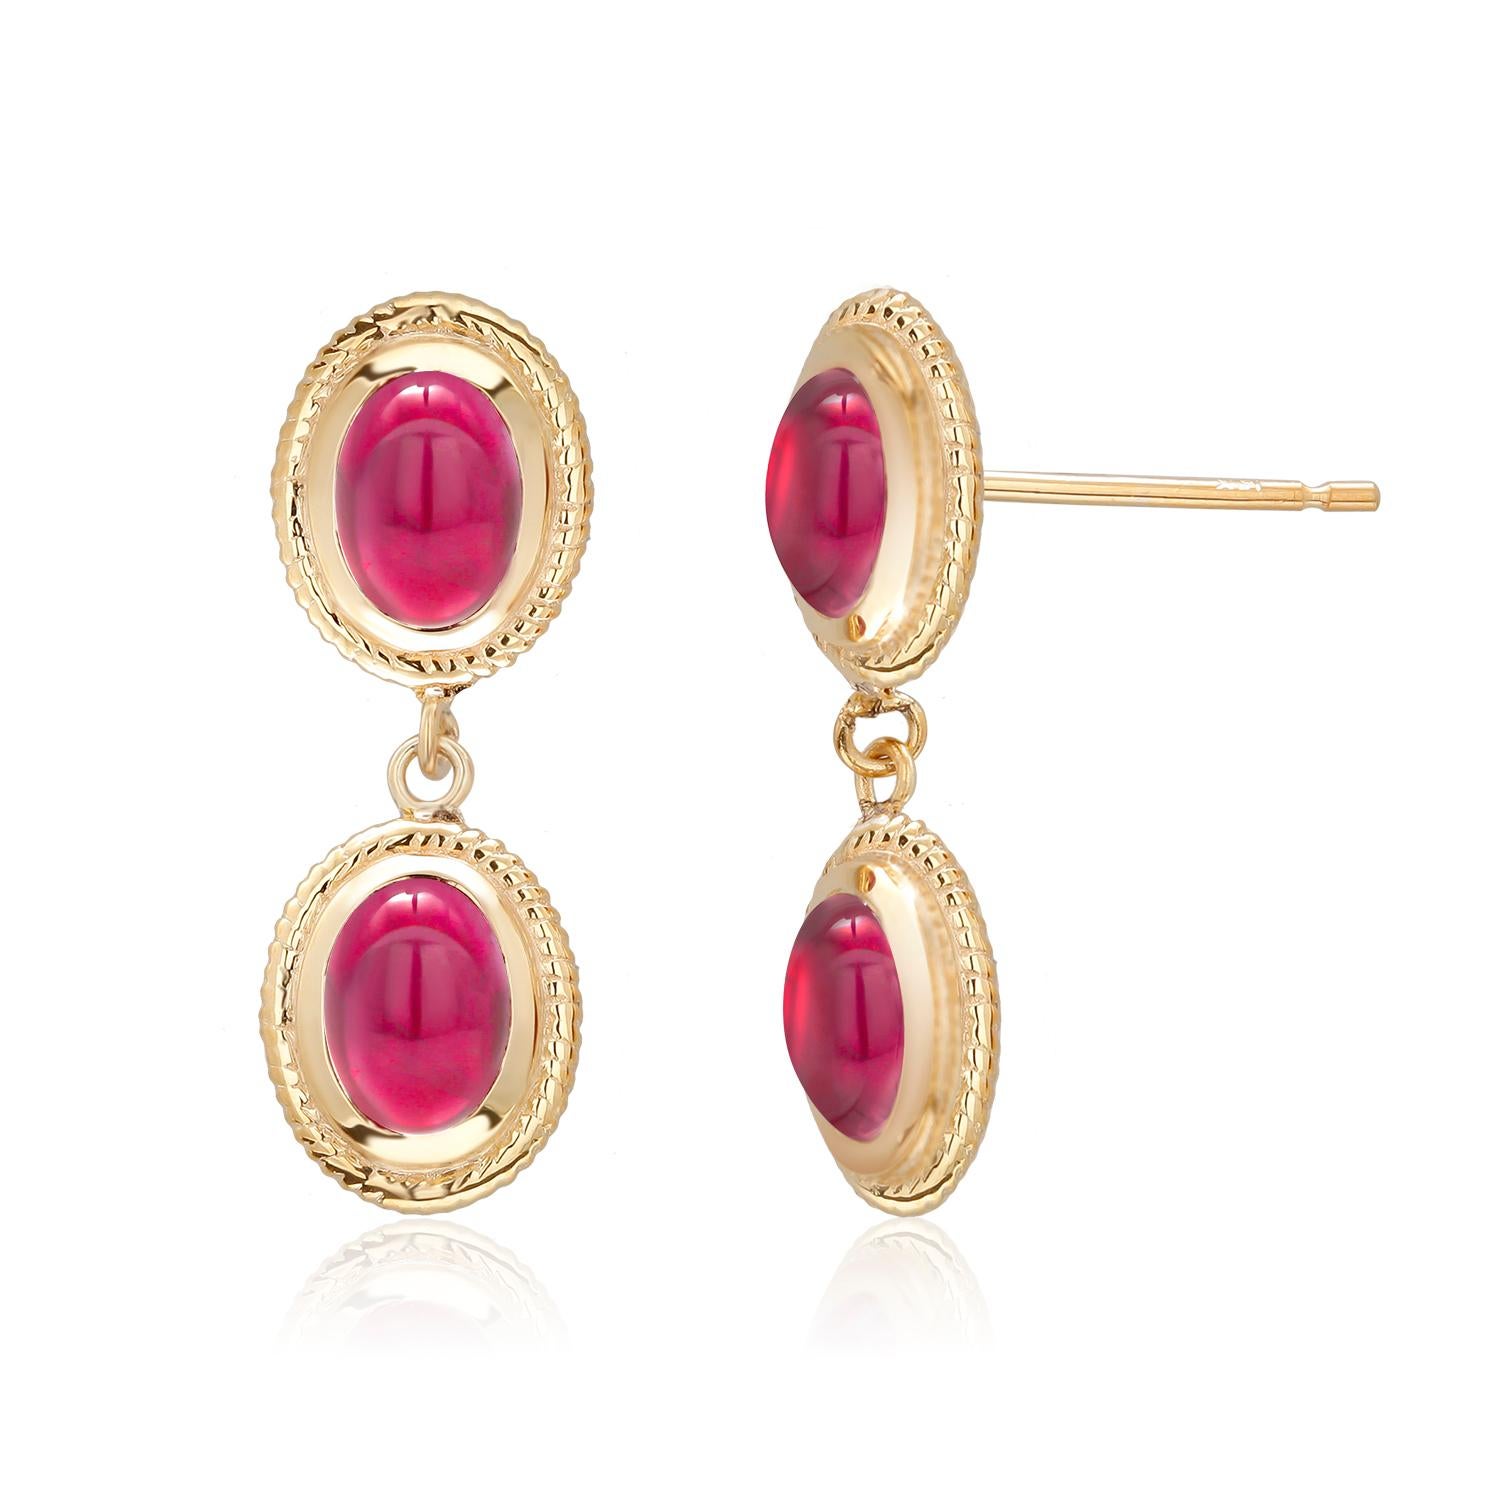 Fourteen karats yellow gold drop earrings 
Four bezel set cabochon Burma ruby weighing 4.50 carats
Ruby hue tone color is of rose red
New Earrings
Handmade in the USA
Earrings are hanging off a straight post with friction push backs 
Our design team